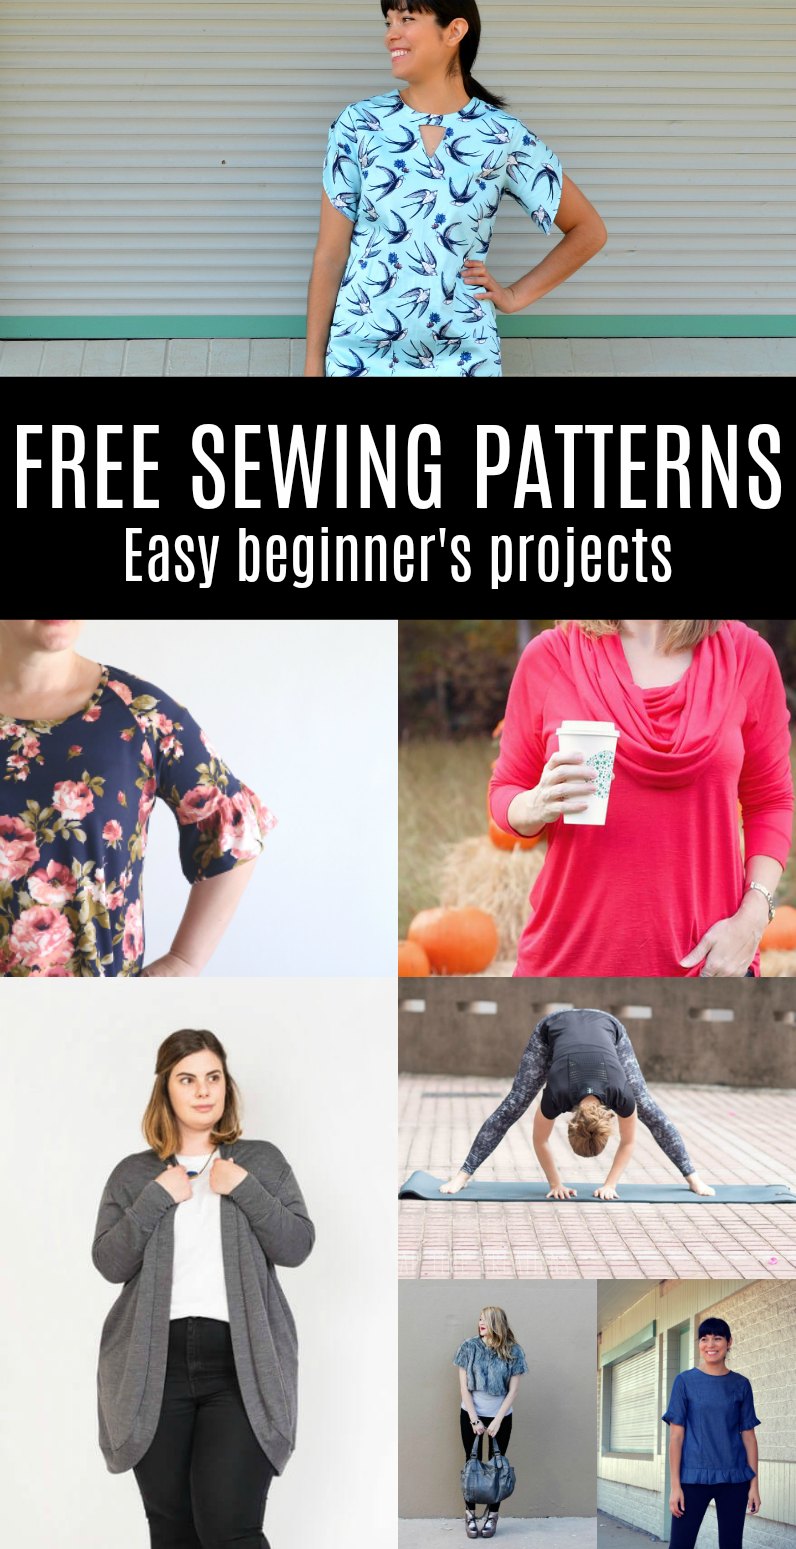 FREE PATTERN ALERT: 20 Sewing patterns for Beginners | On the Cutting ...